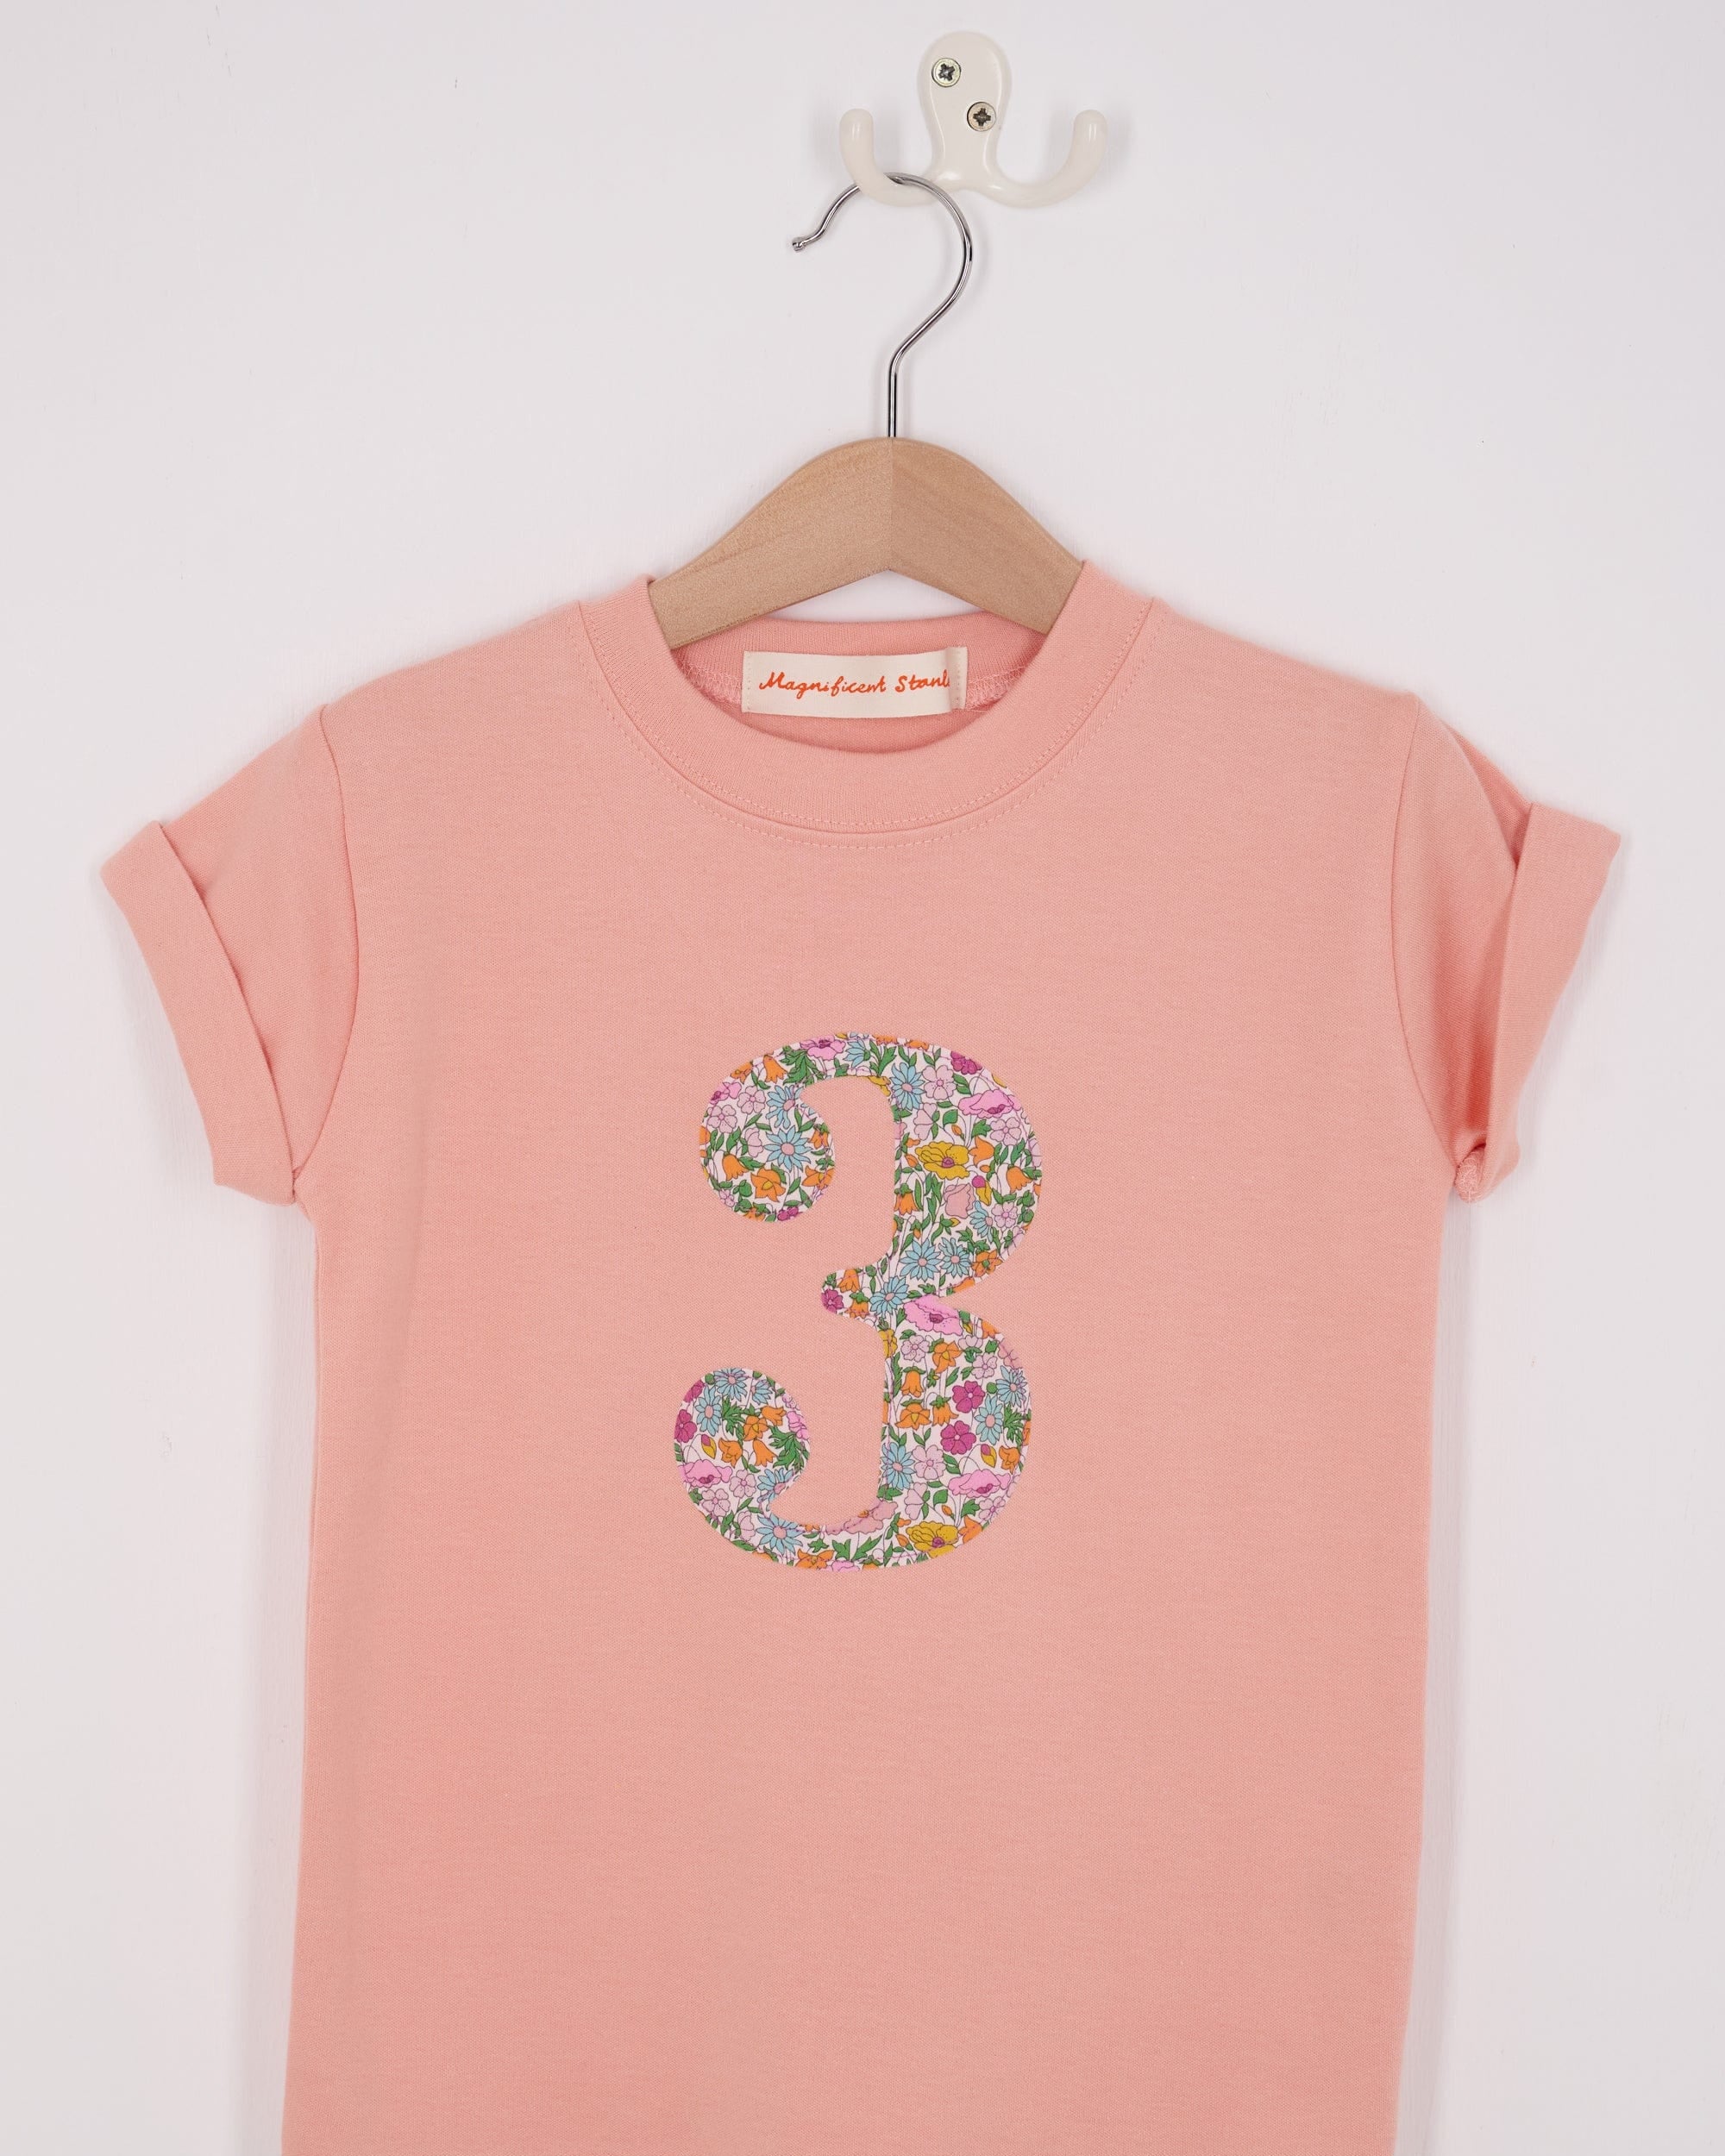 Magnificent Stanley Tee Number Dusty Pink T-Shirt in Poppy Forest Liberty Print